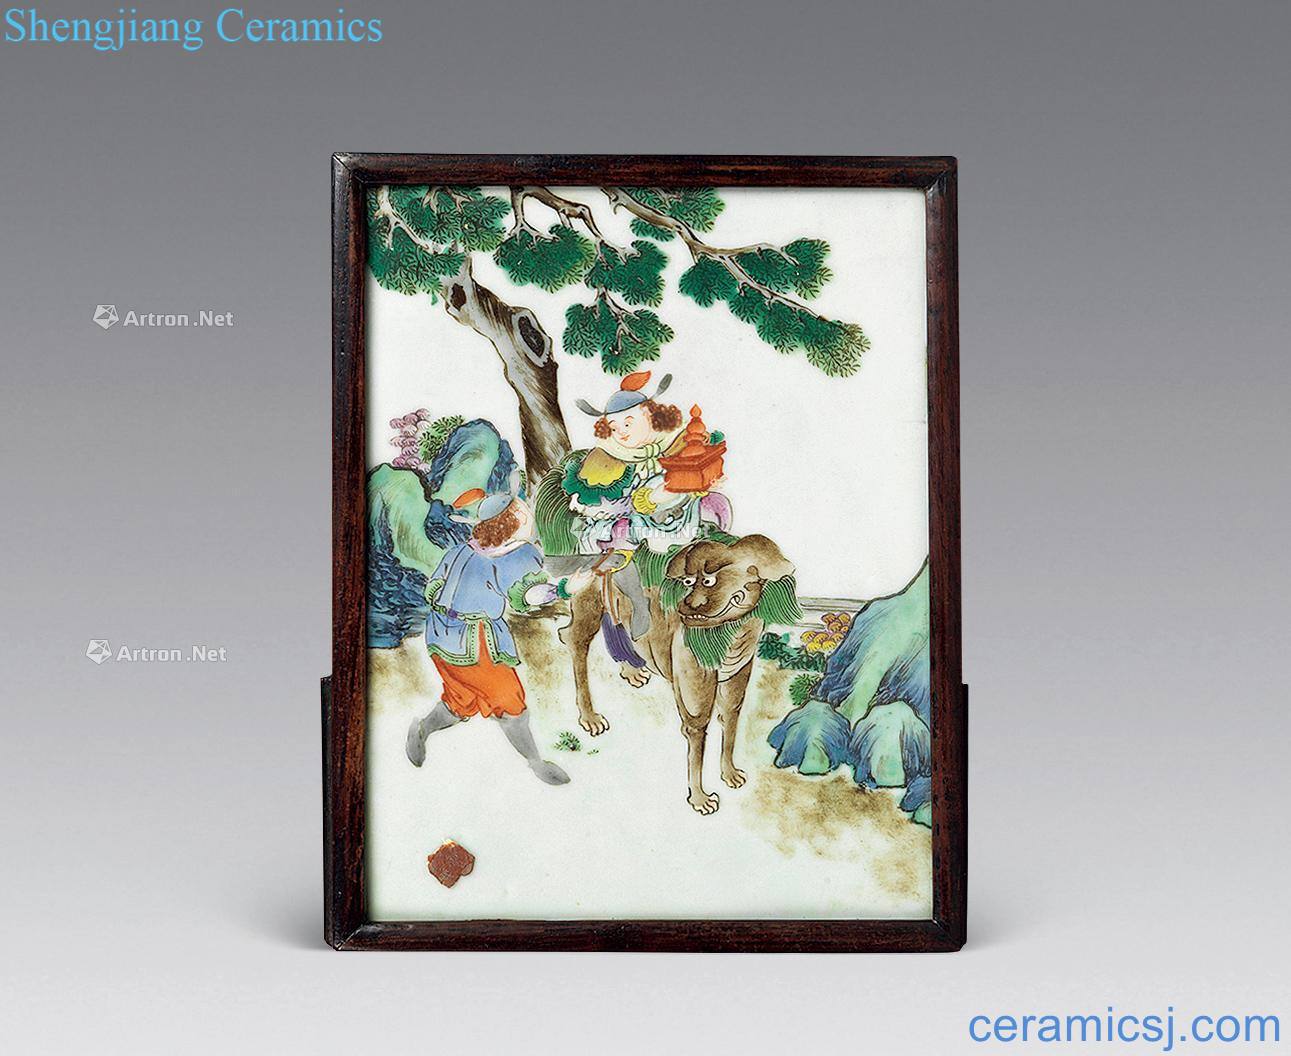 Qing benevolent porcelain plate colorful characters